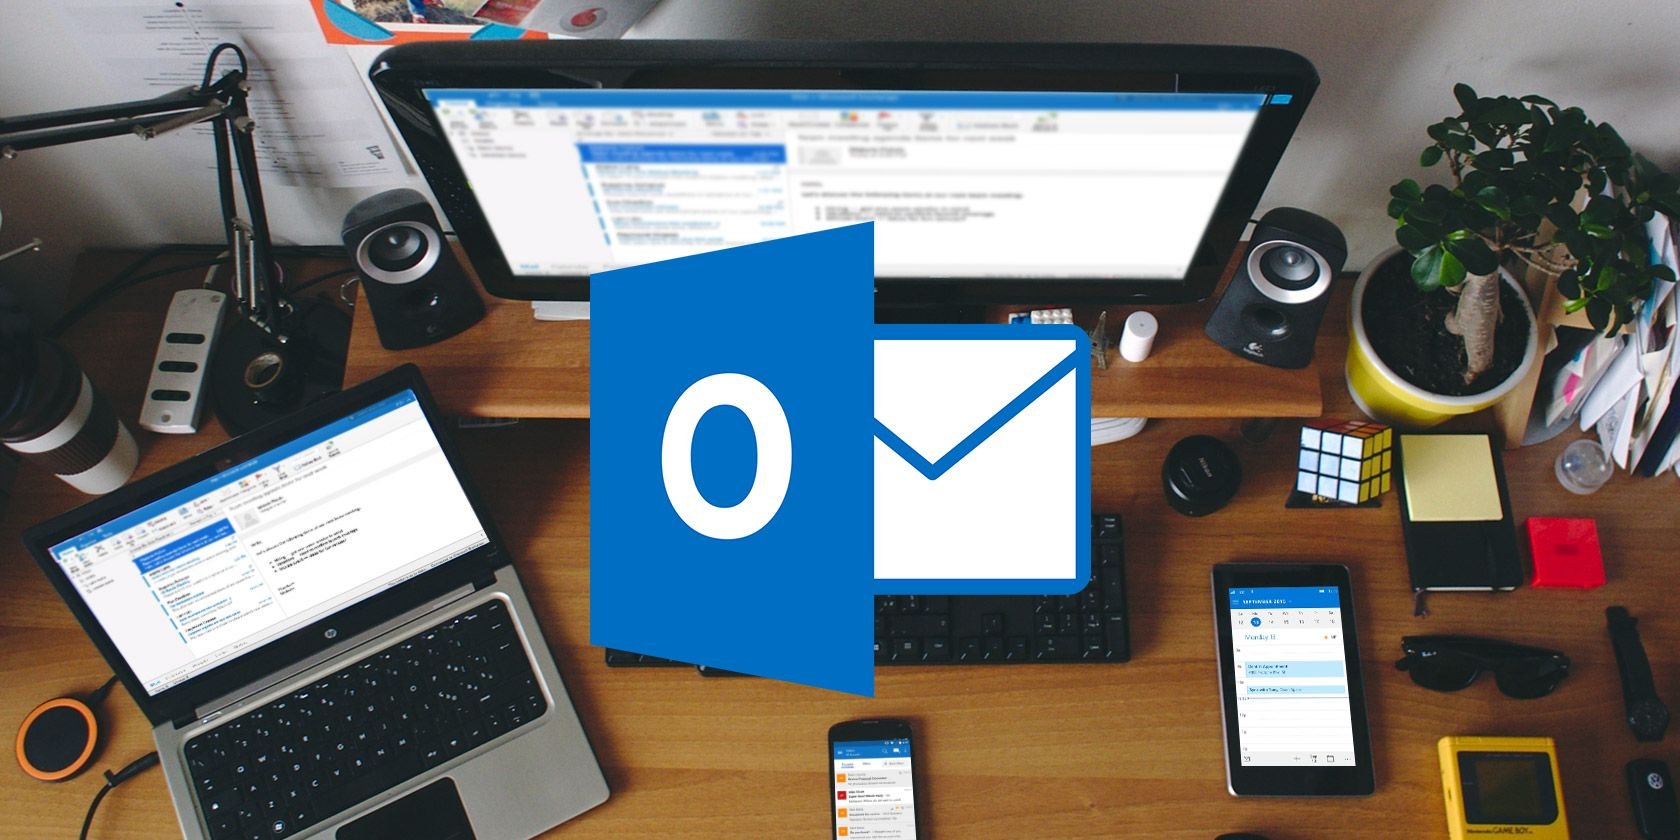 How to Access Hotmail and Outlook Accounts on Android